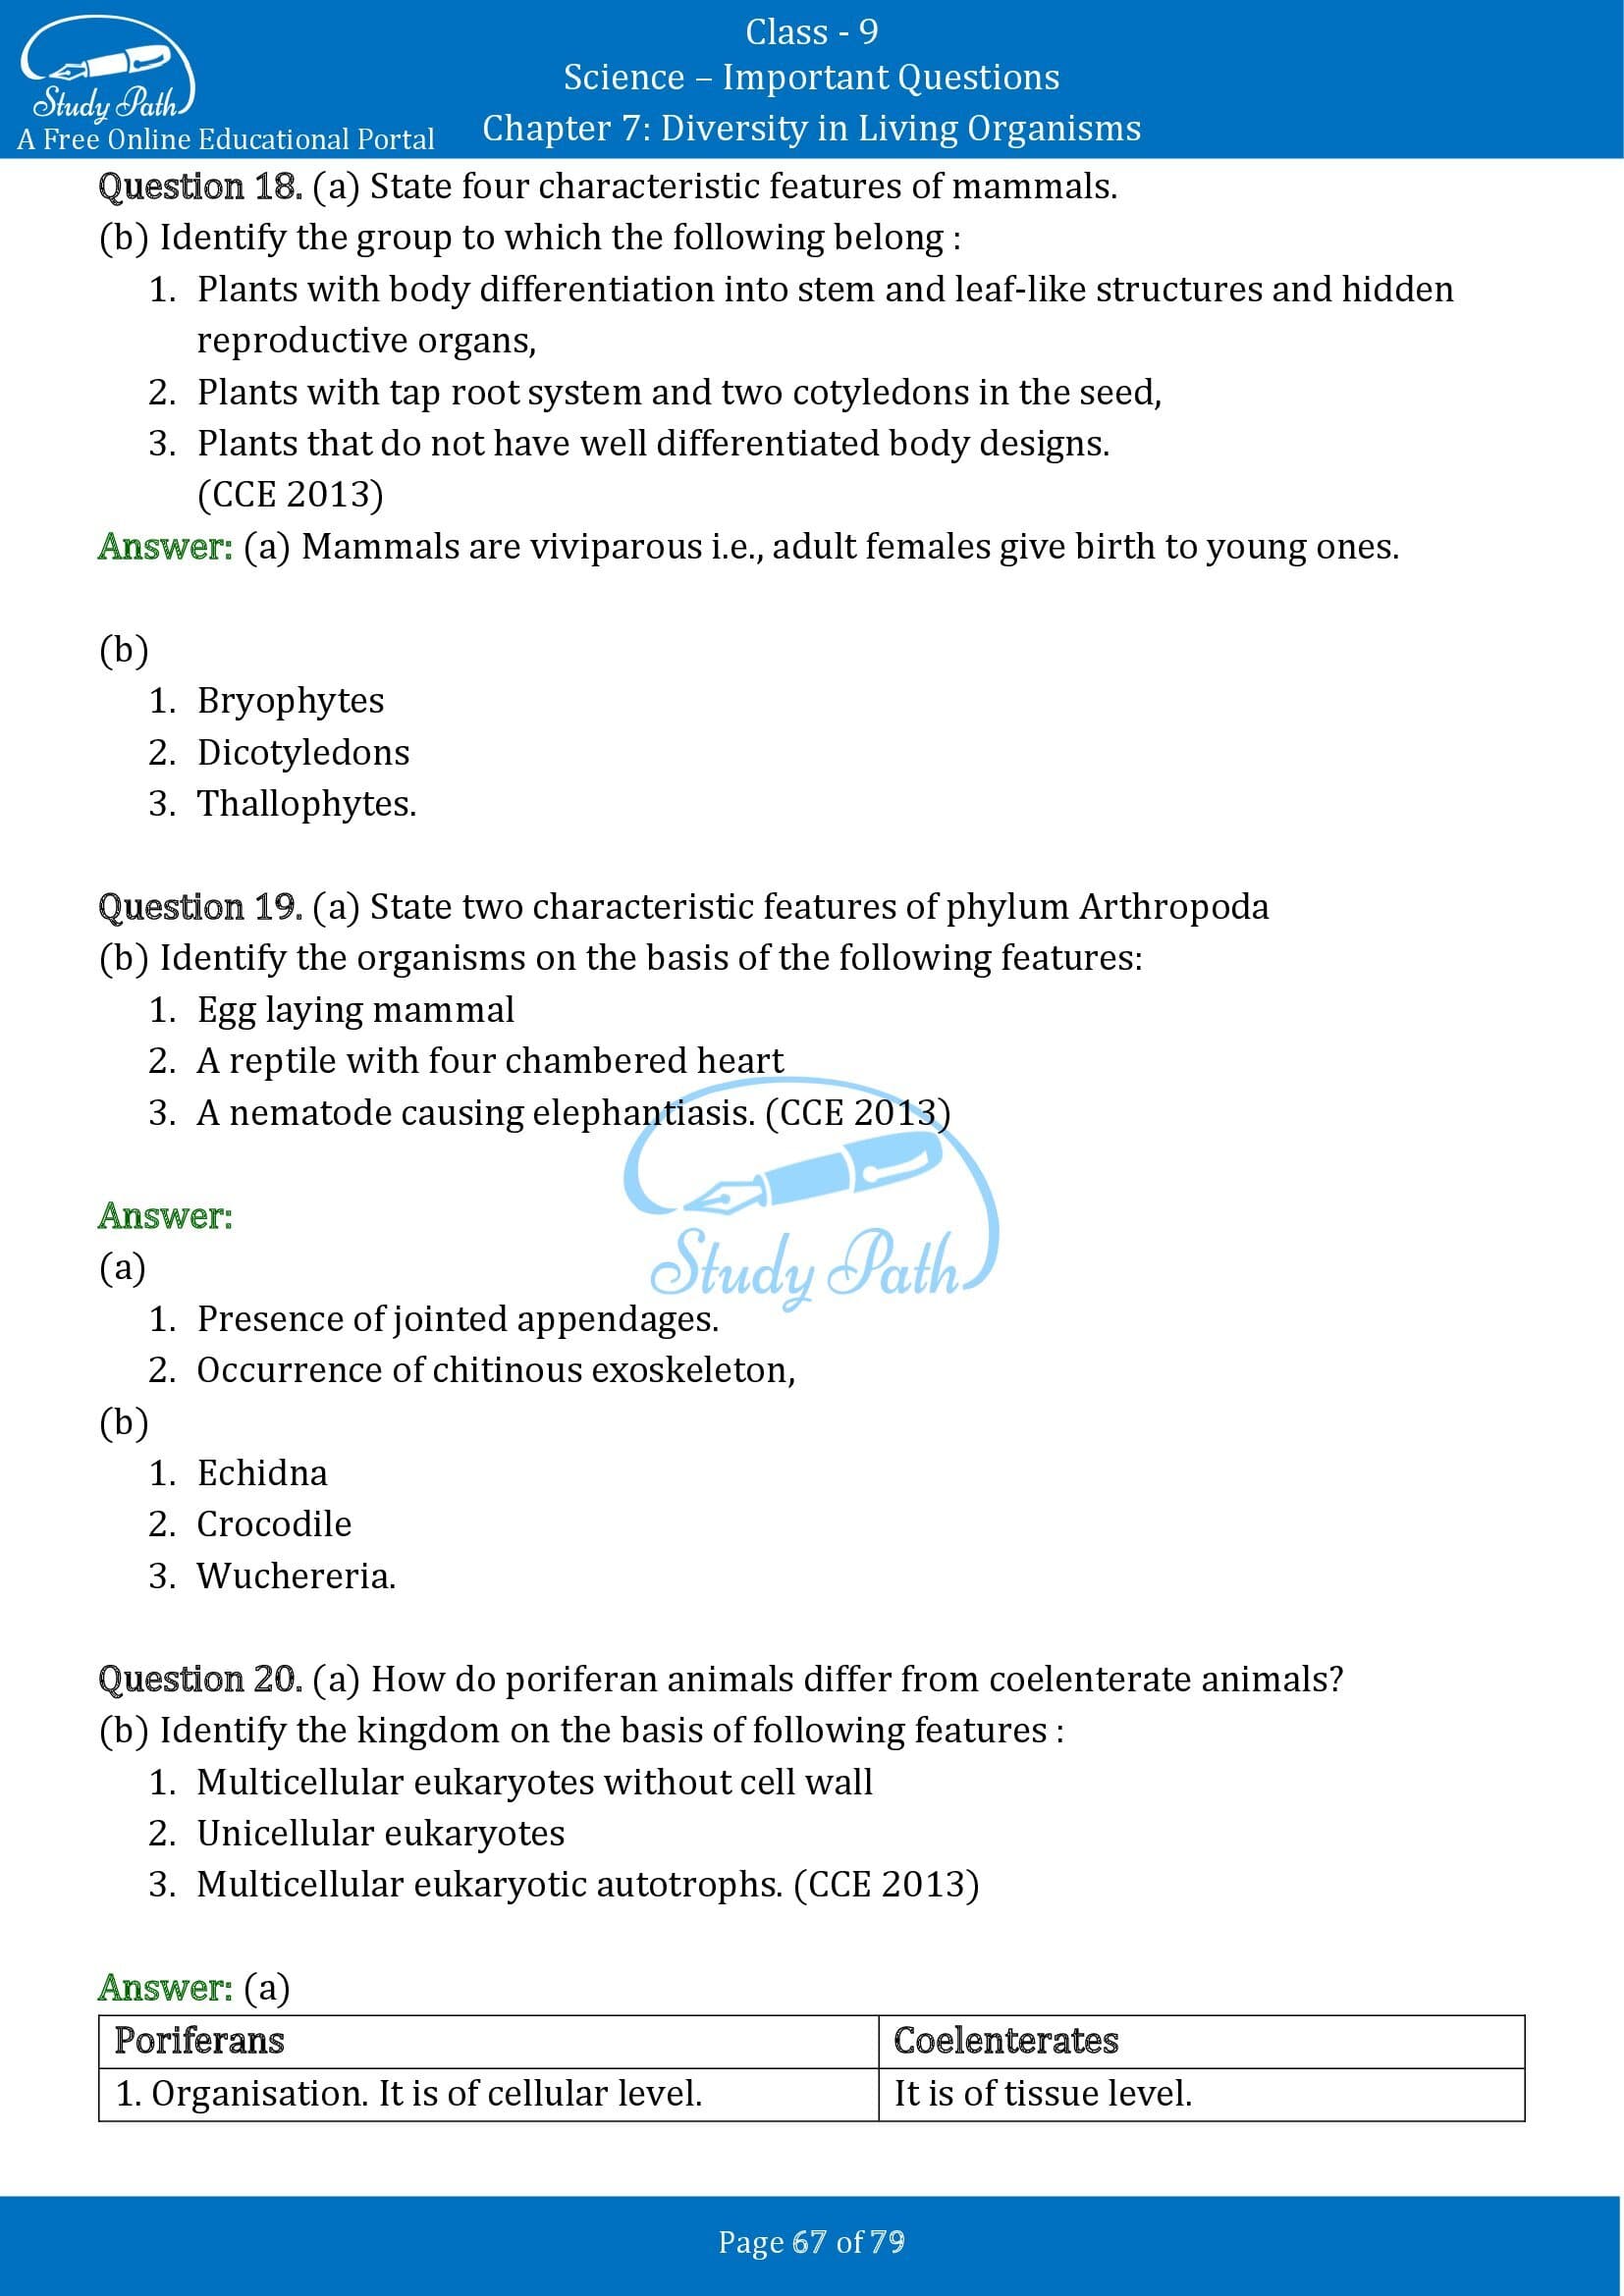 Important Questions for Class 9 Science Chapter 7 Diversity in Living Organisms 00067